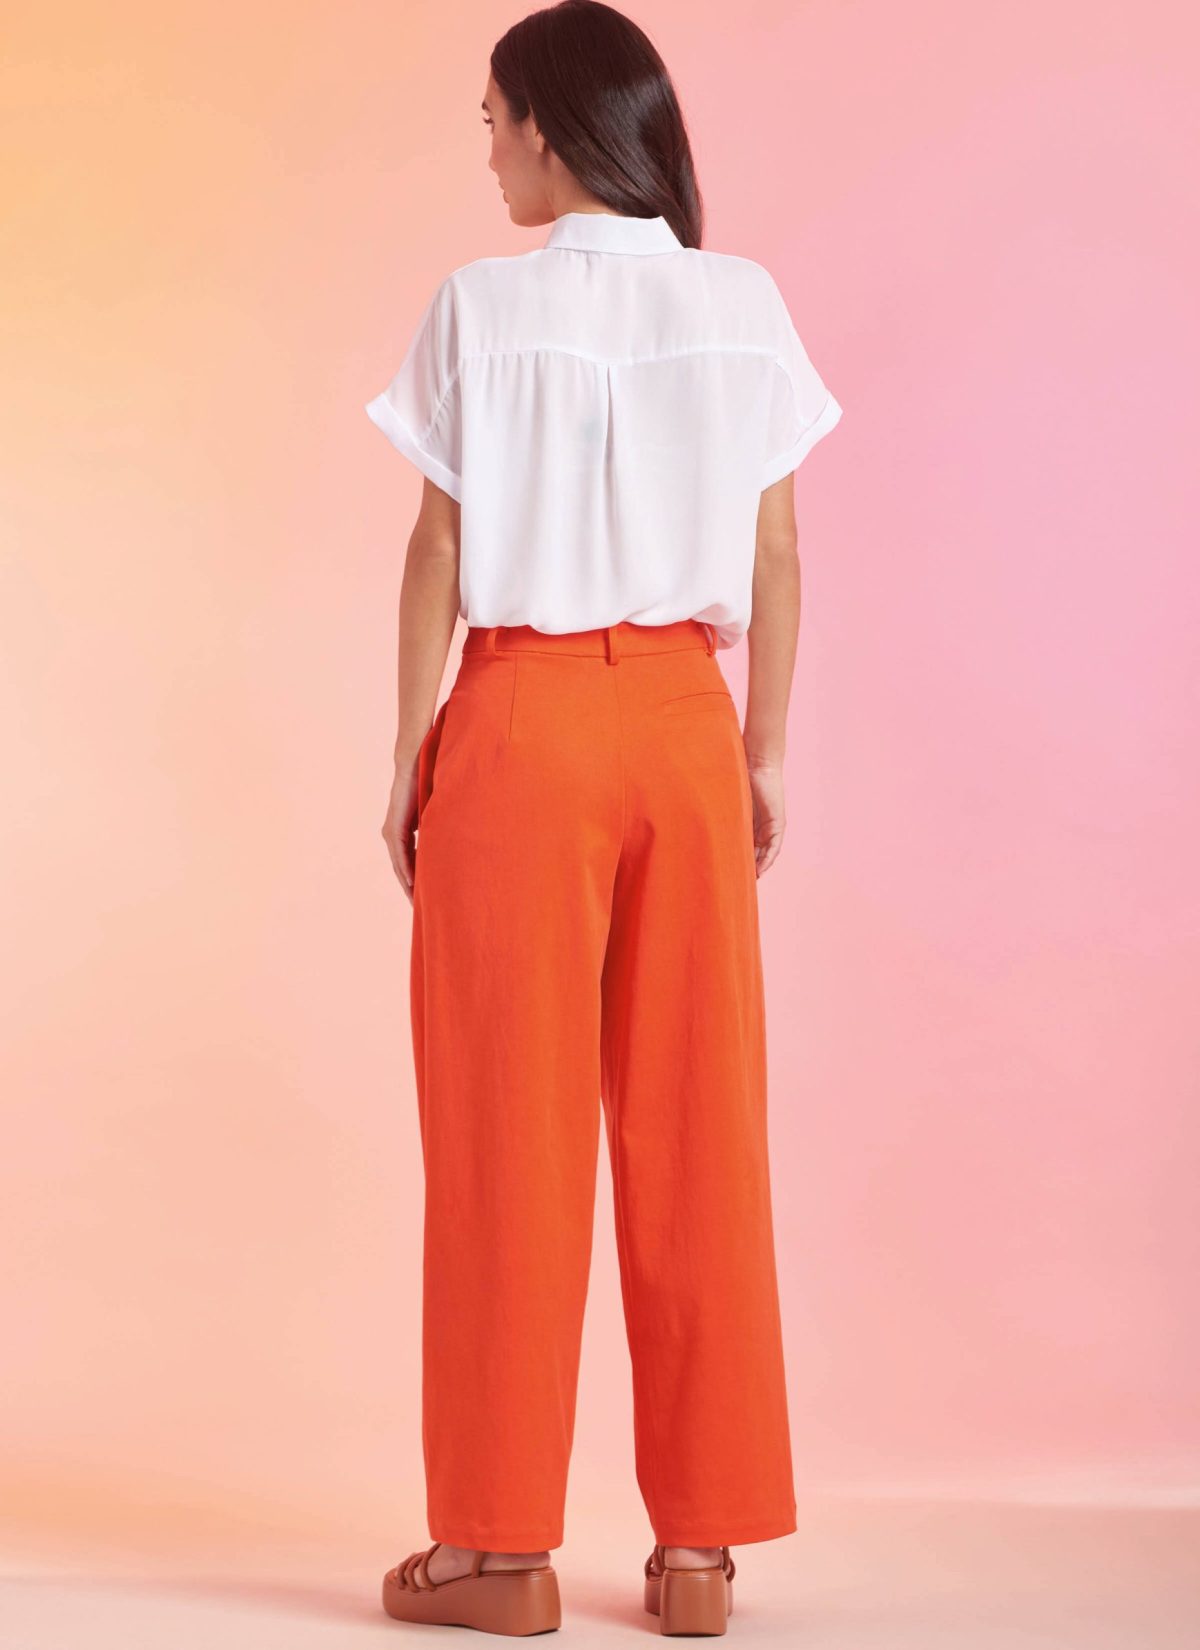 Simplicity Sewing Pattern S9753 Misses’ Trousers - Sewdirect